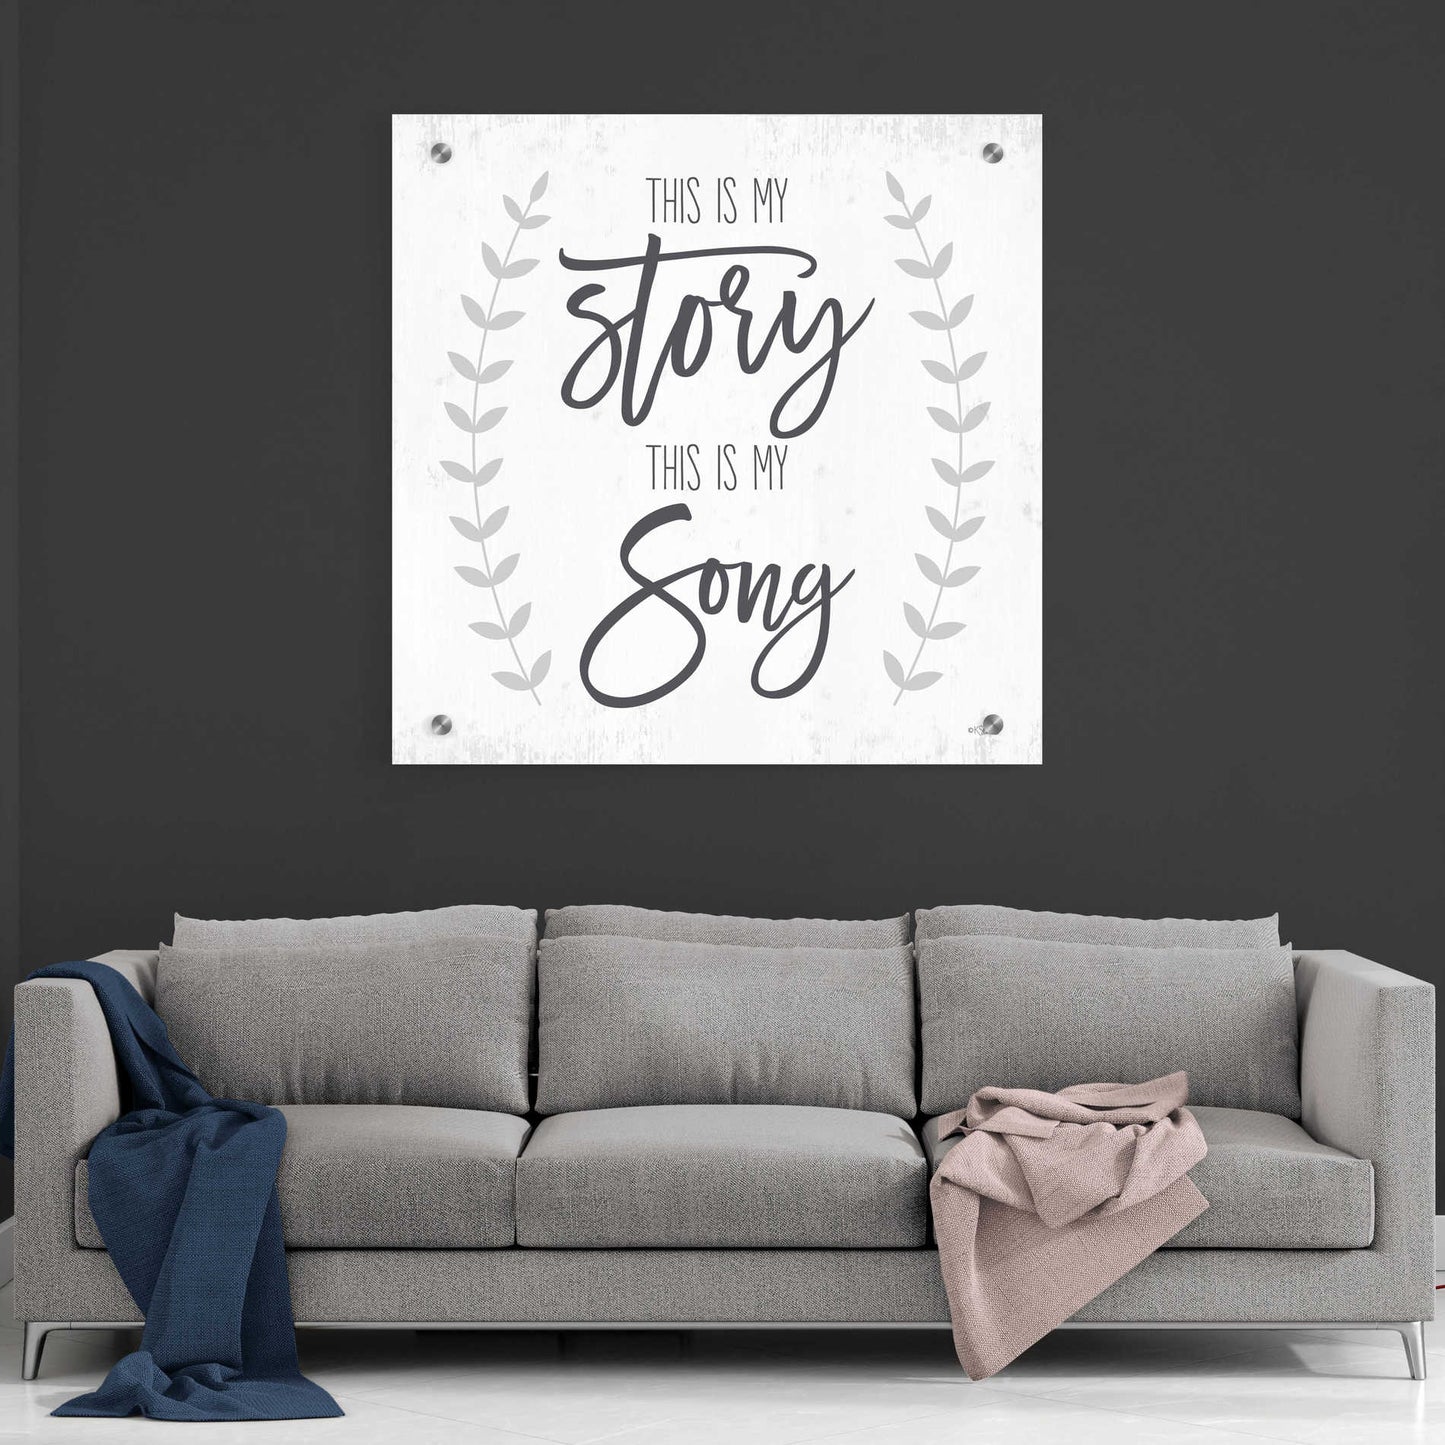 Epic Art 'This is My Story I' by Kate Sherrill, Acrylic Glass Wall Art,36x36